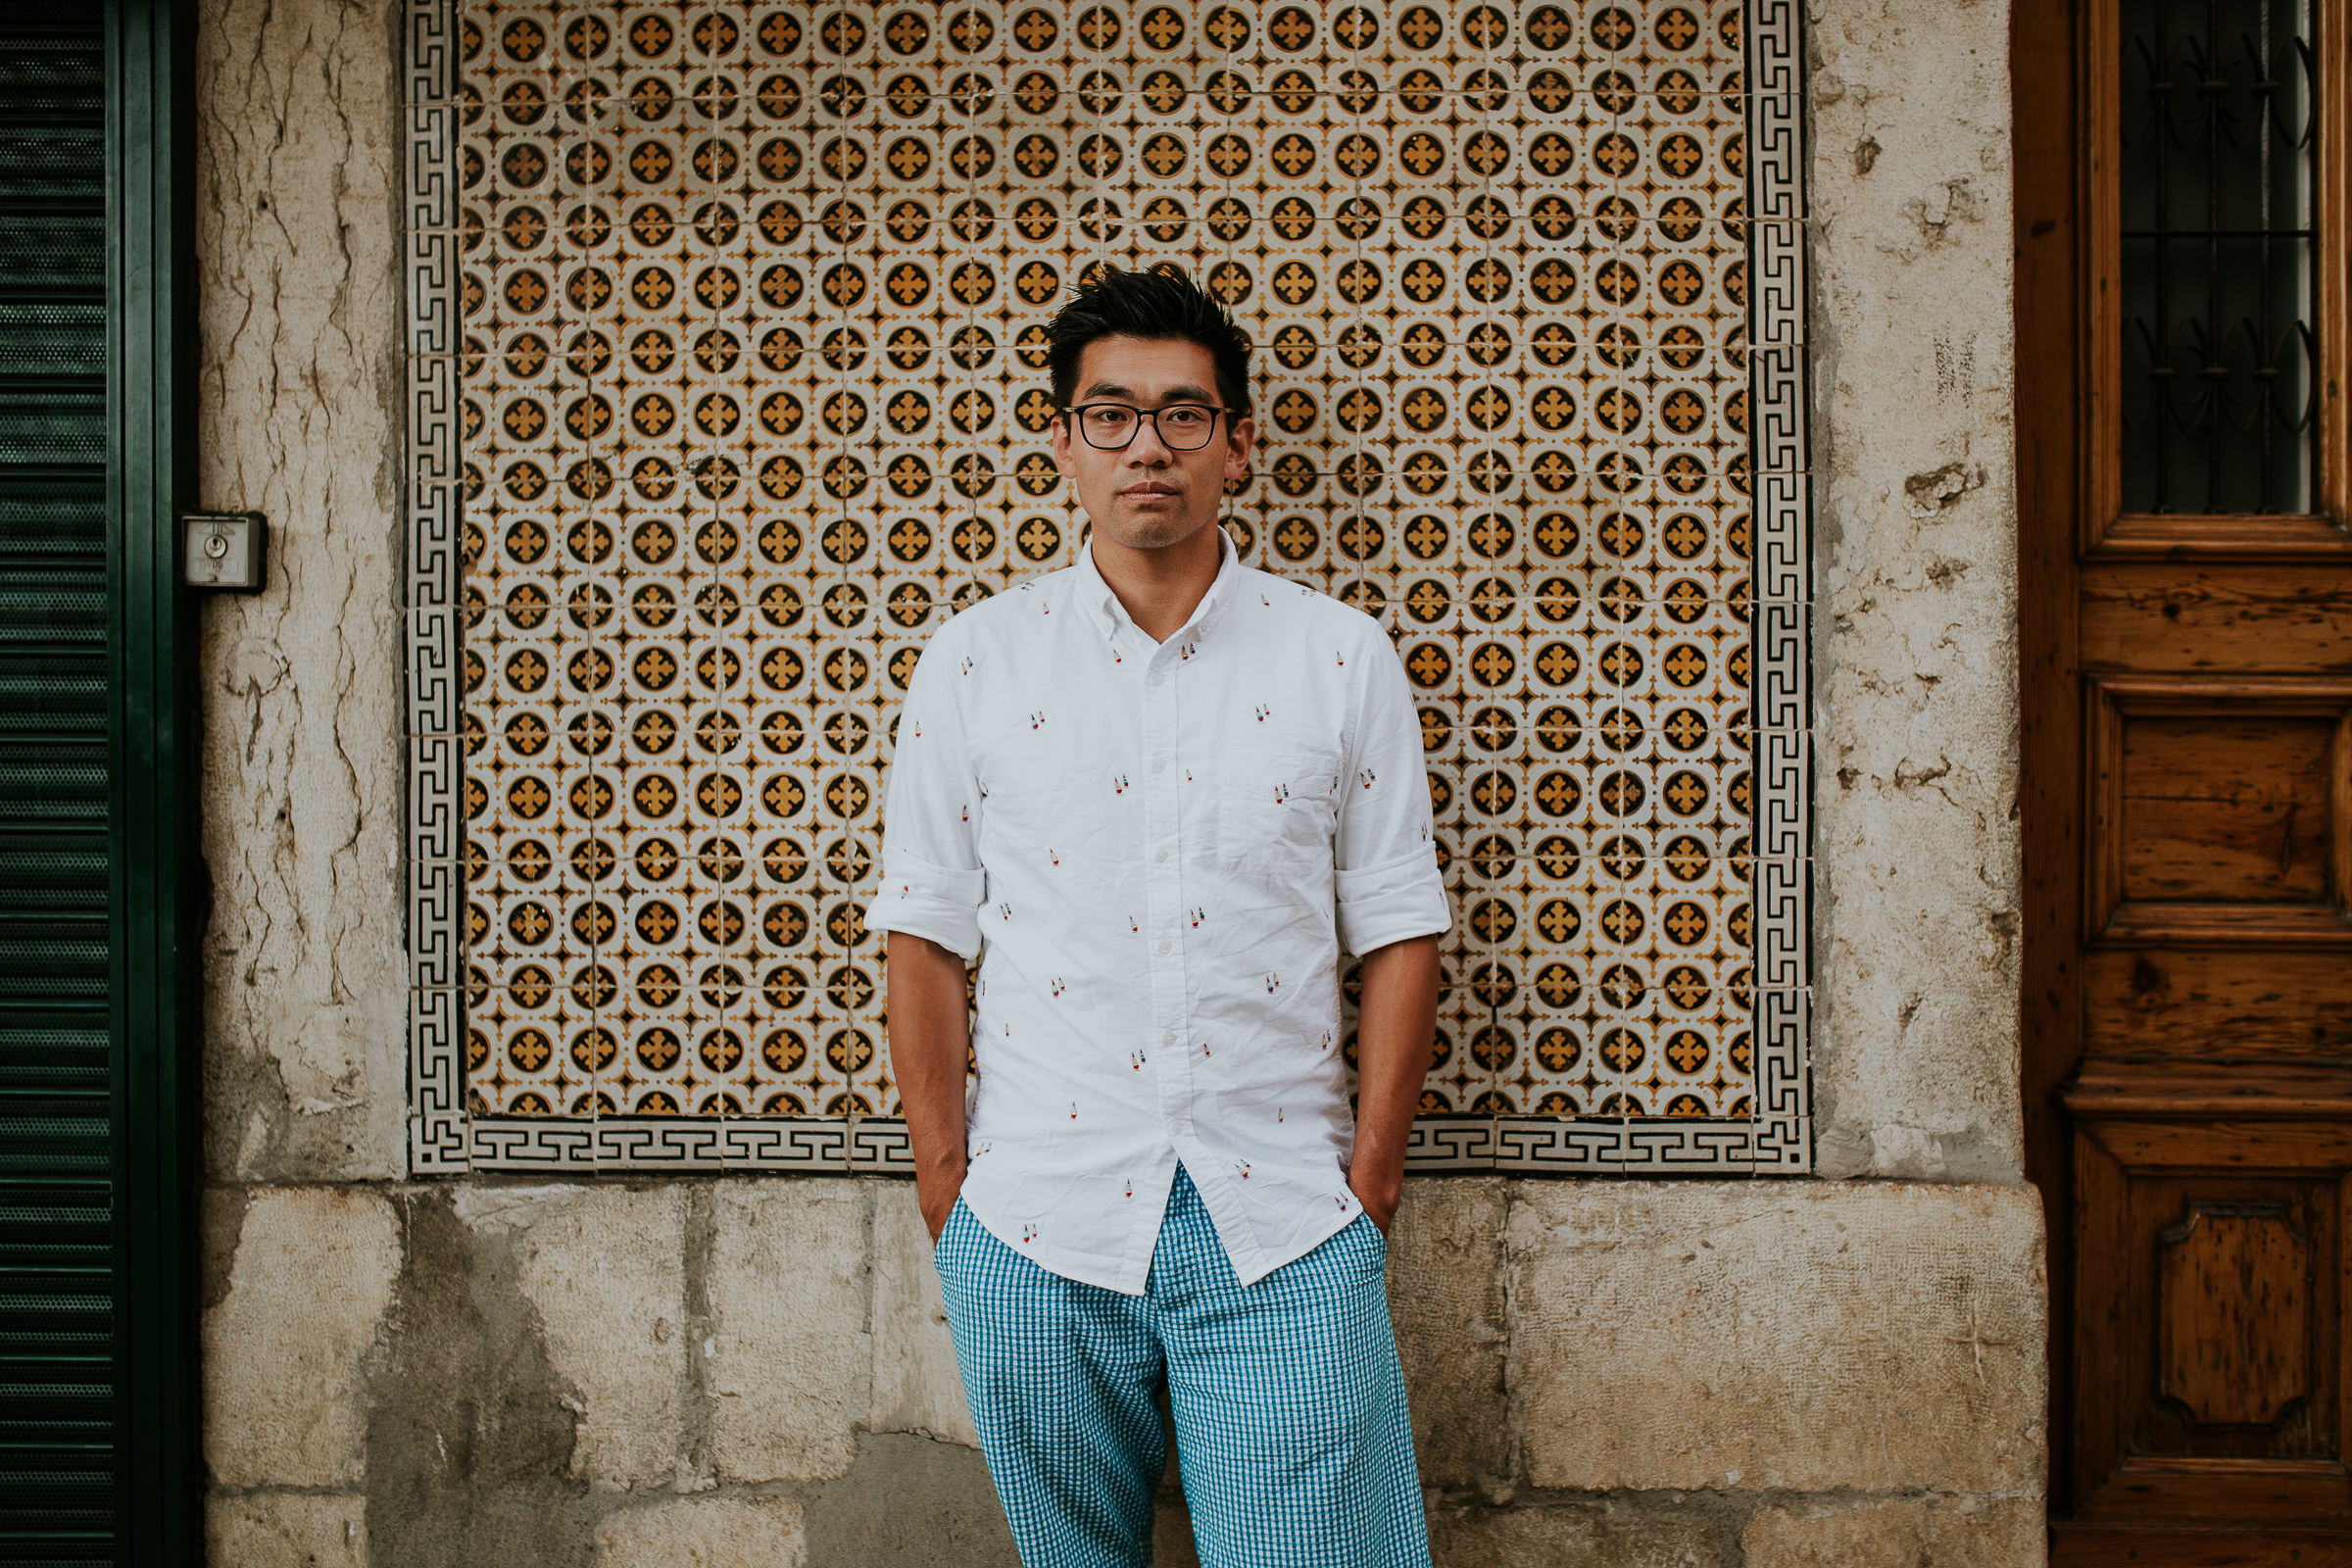 asian man in lisbon street with tiles in background